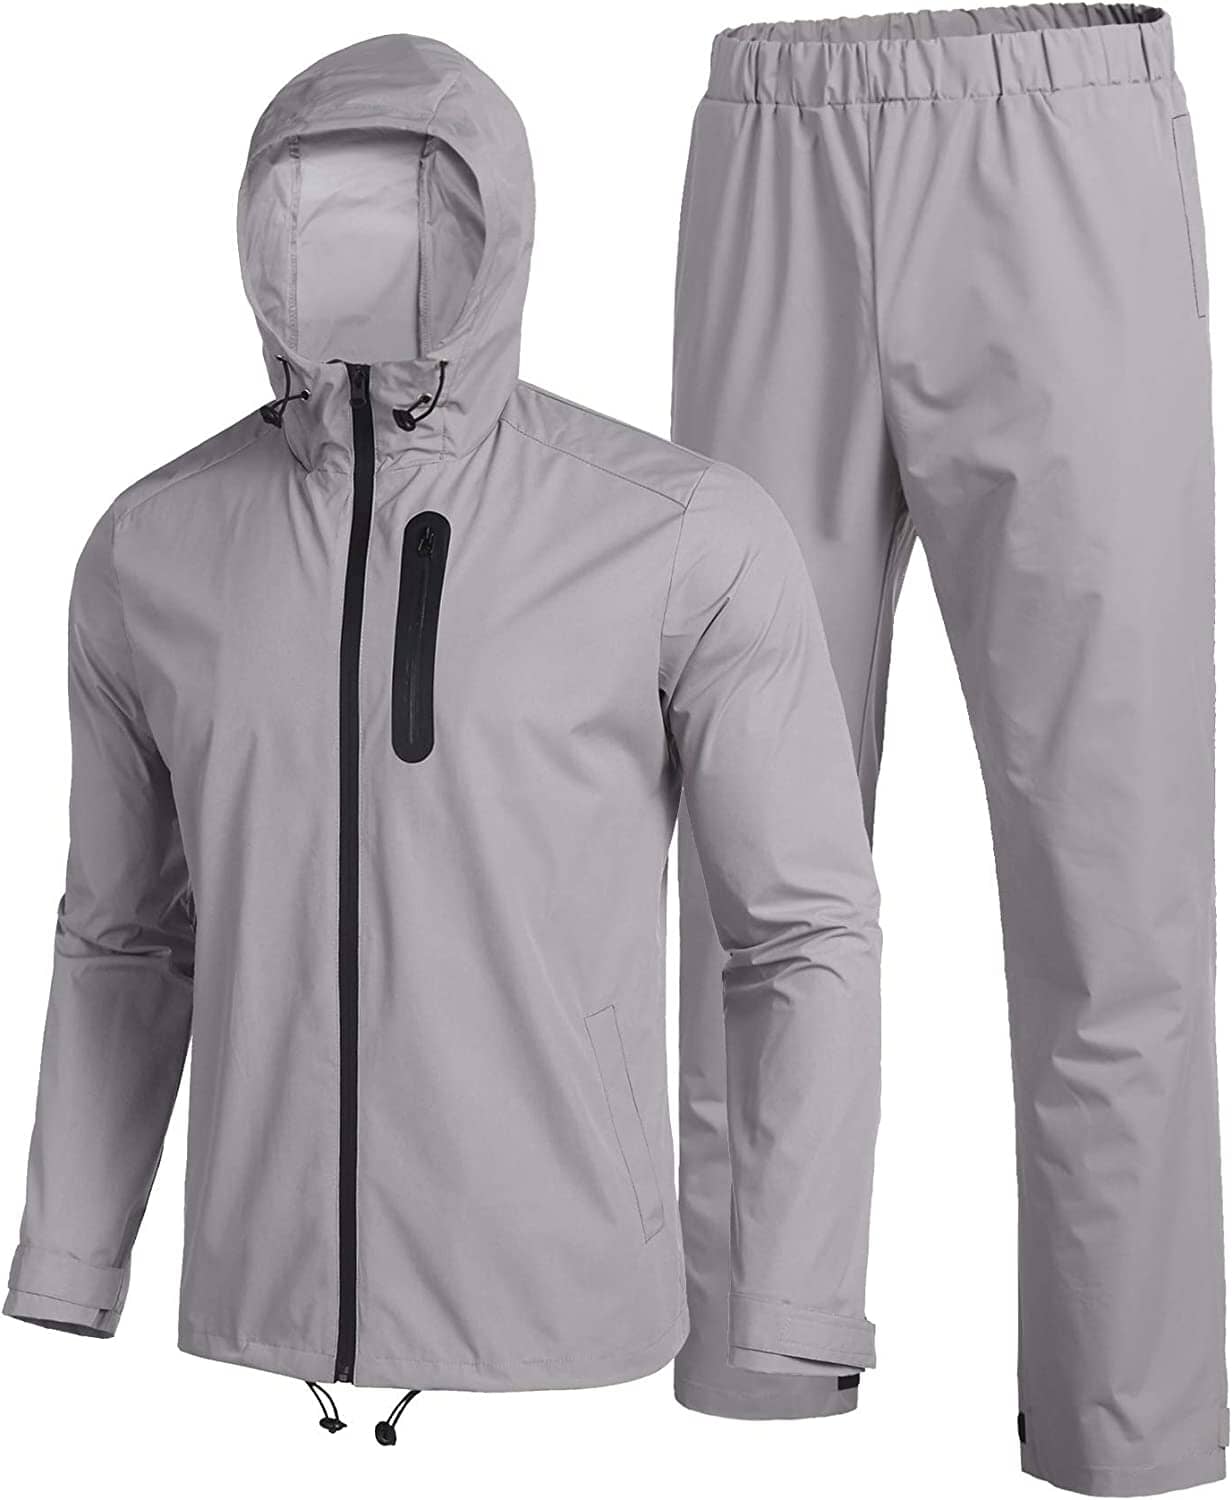 Waterproof Lightweight Camping Rain Suit (US Only) Sports Set COOFANDY Store Grey S 